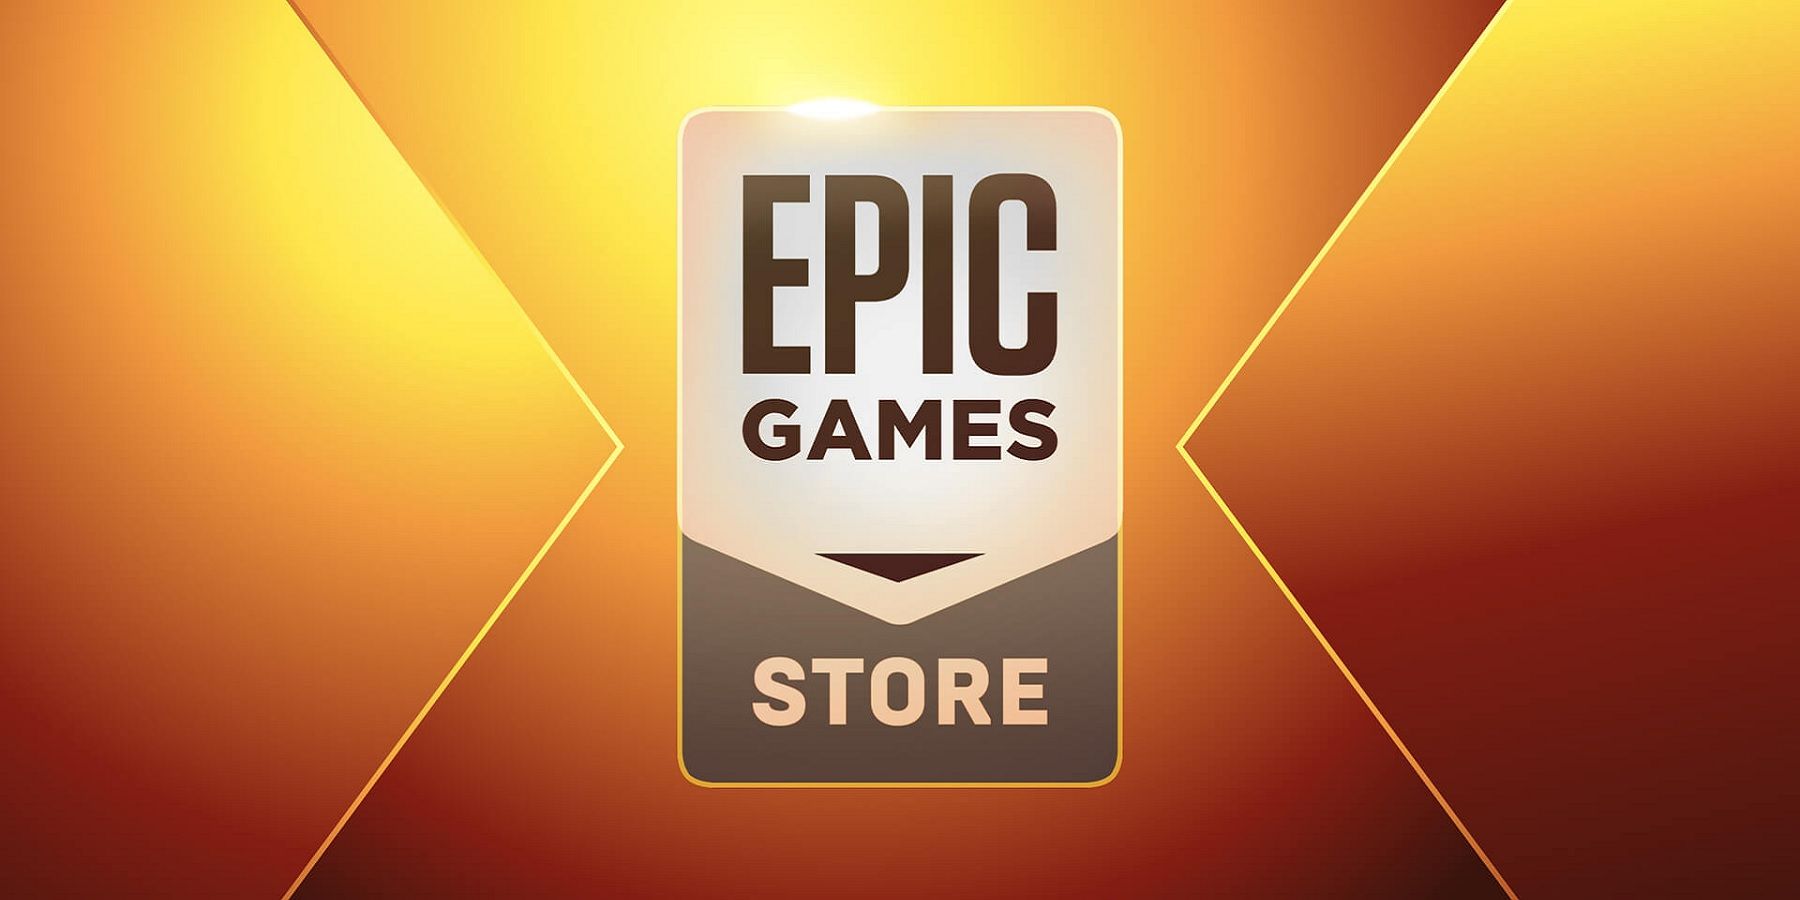 Golden Light  Download and Buy Today - Epic Games Store